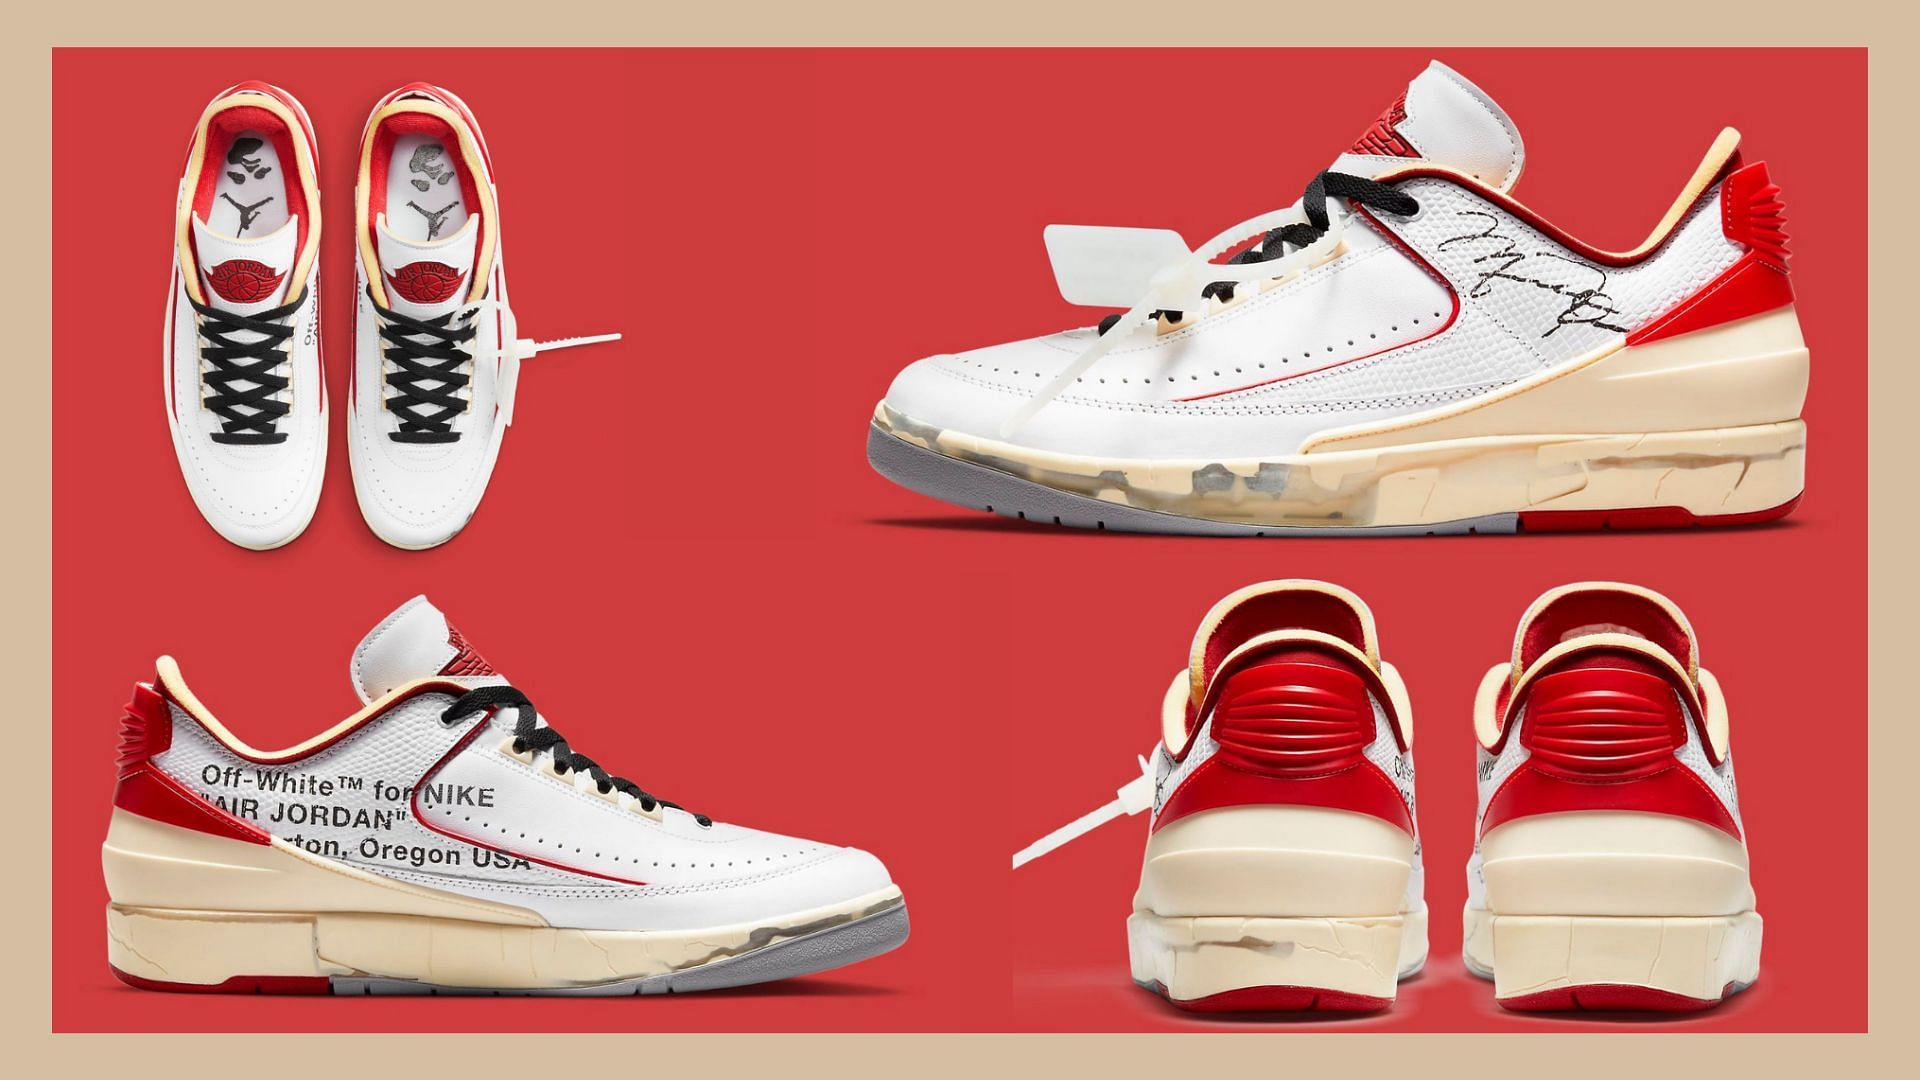 Take a look at the White and Red AJ2 Low shoe (Image via Sportskeeda)